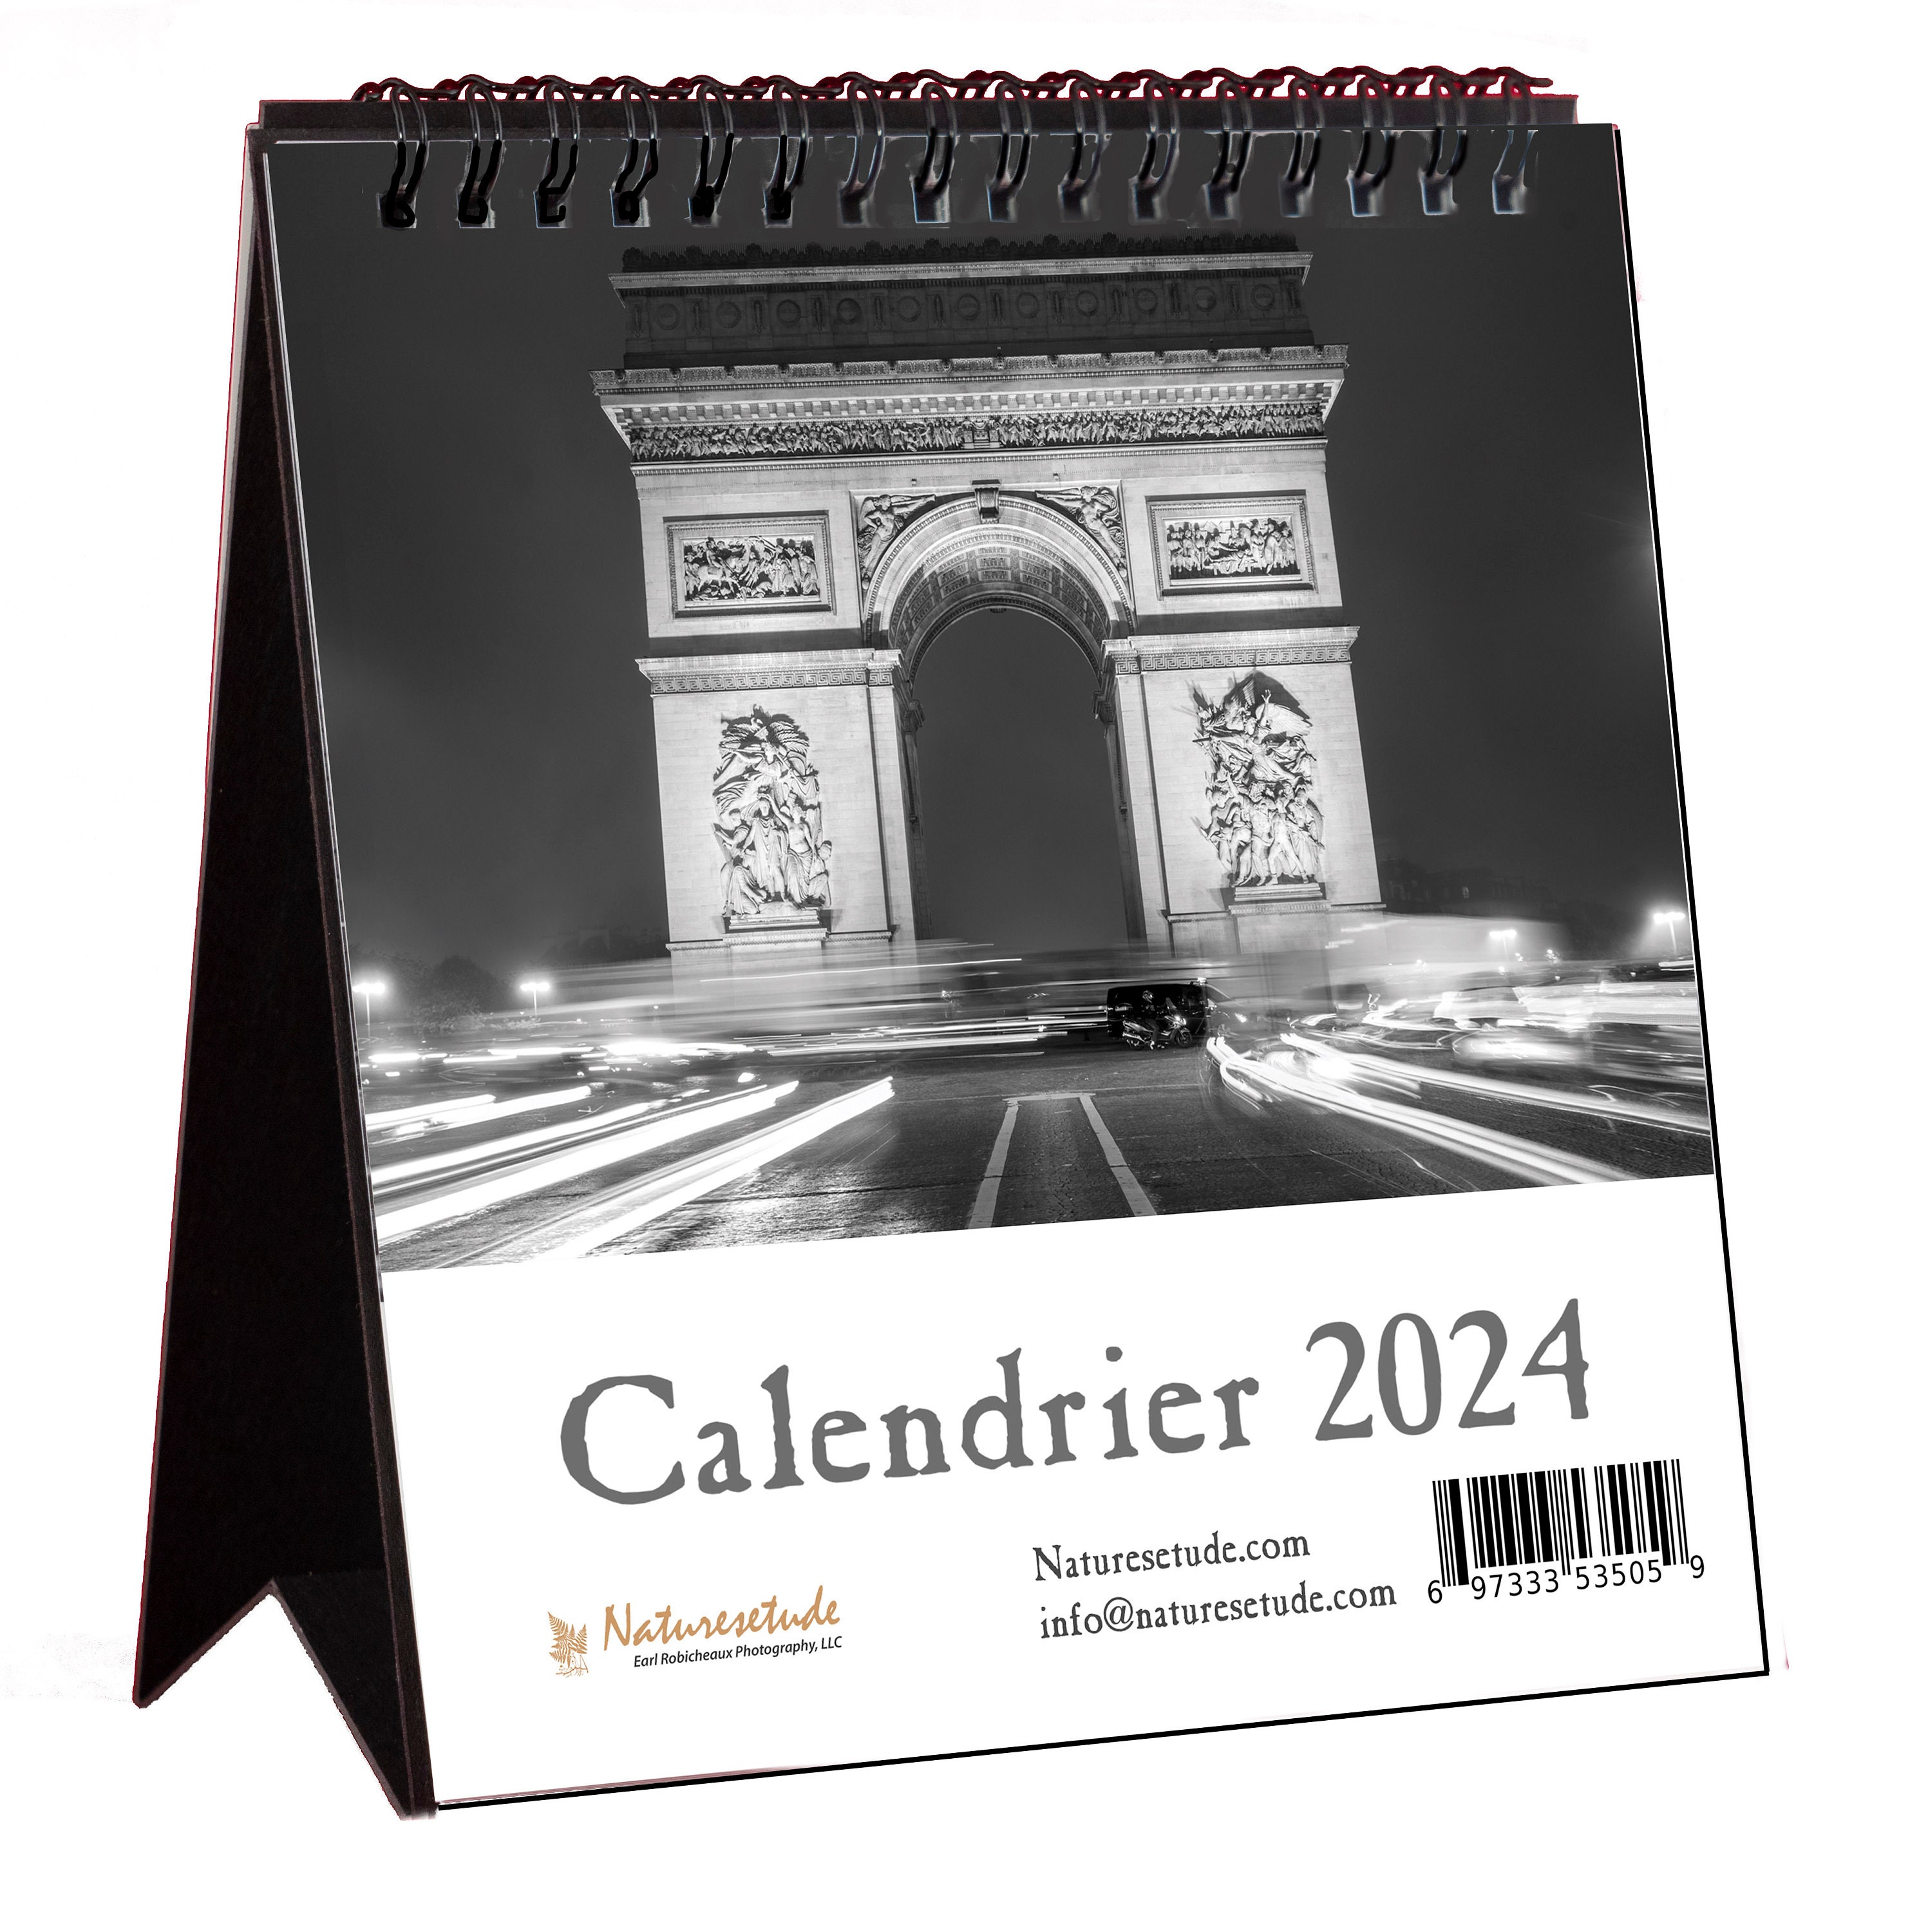 Calendrier publicitaire 2024 recto/verso Made In France - Altha